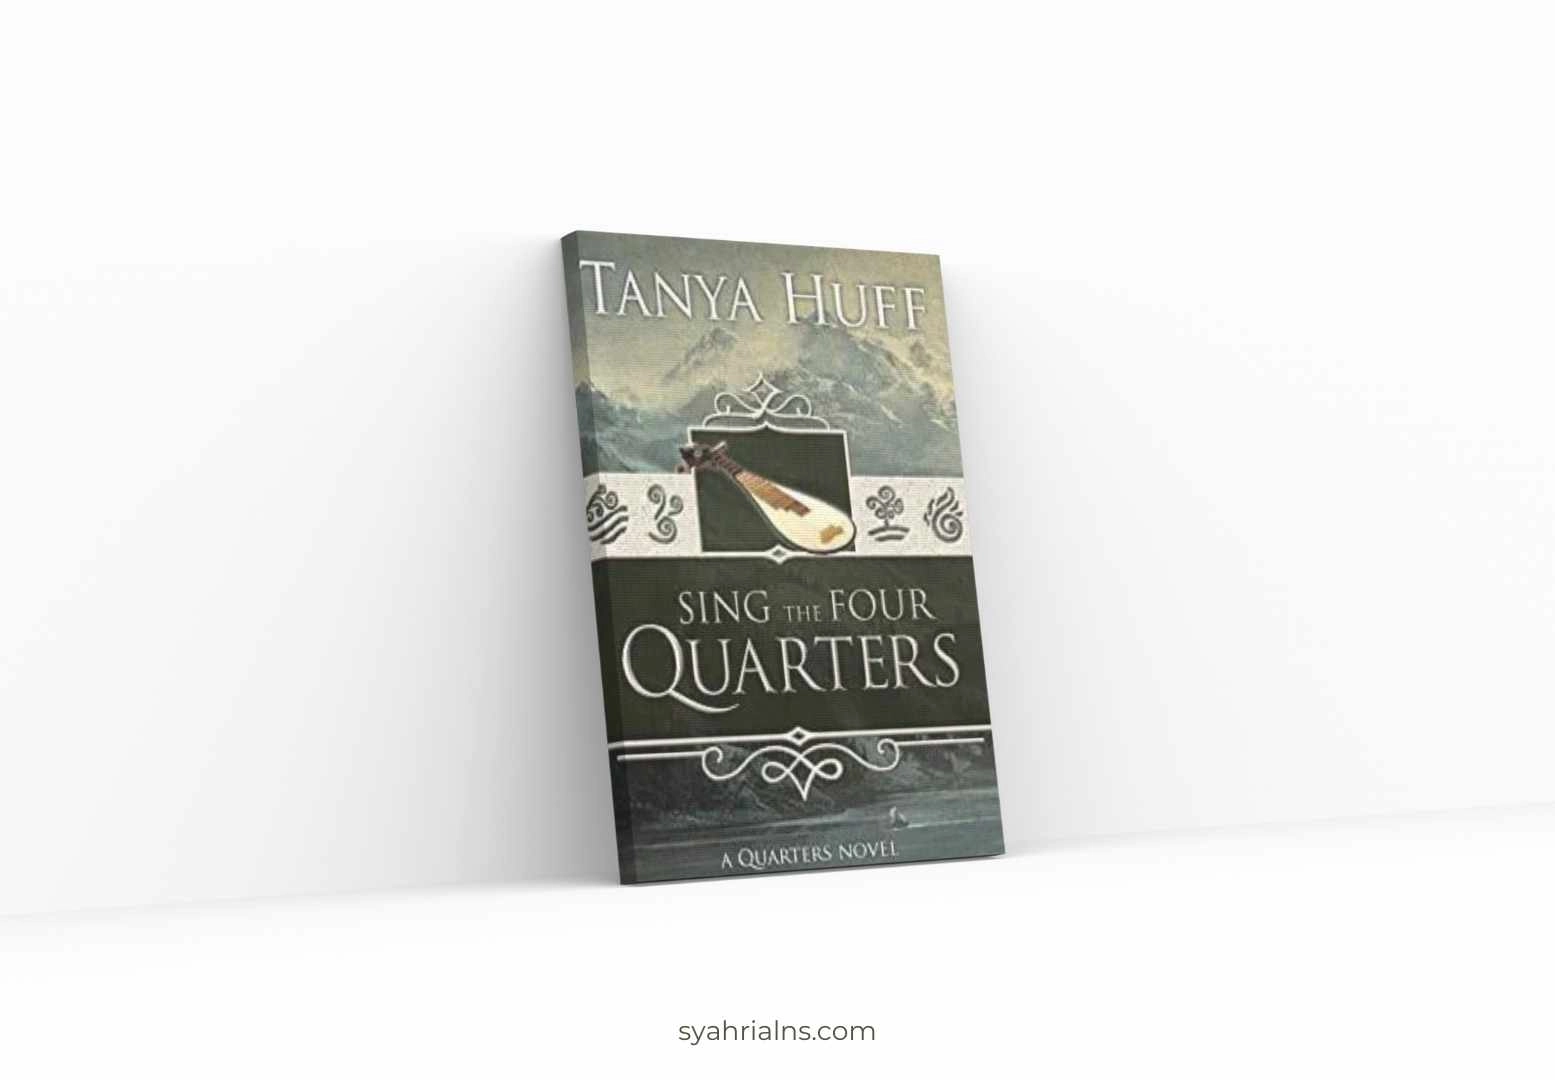 Quarters series by Tanya Huff